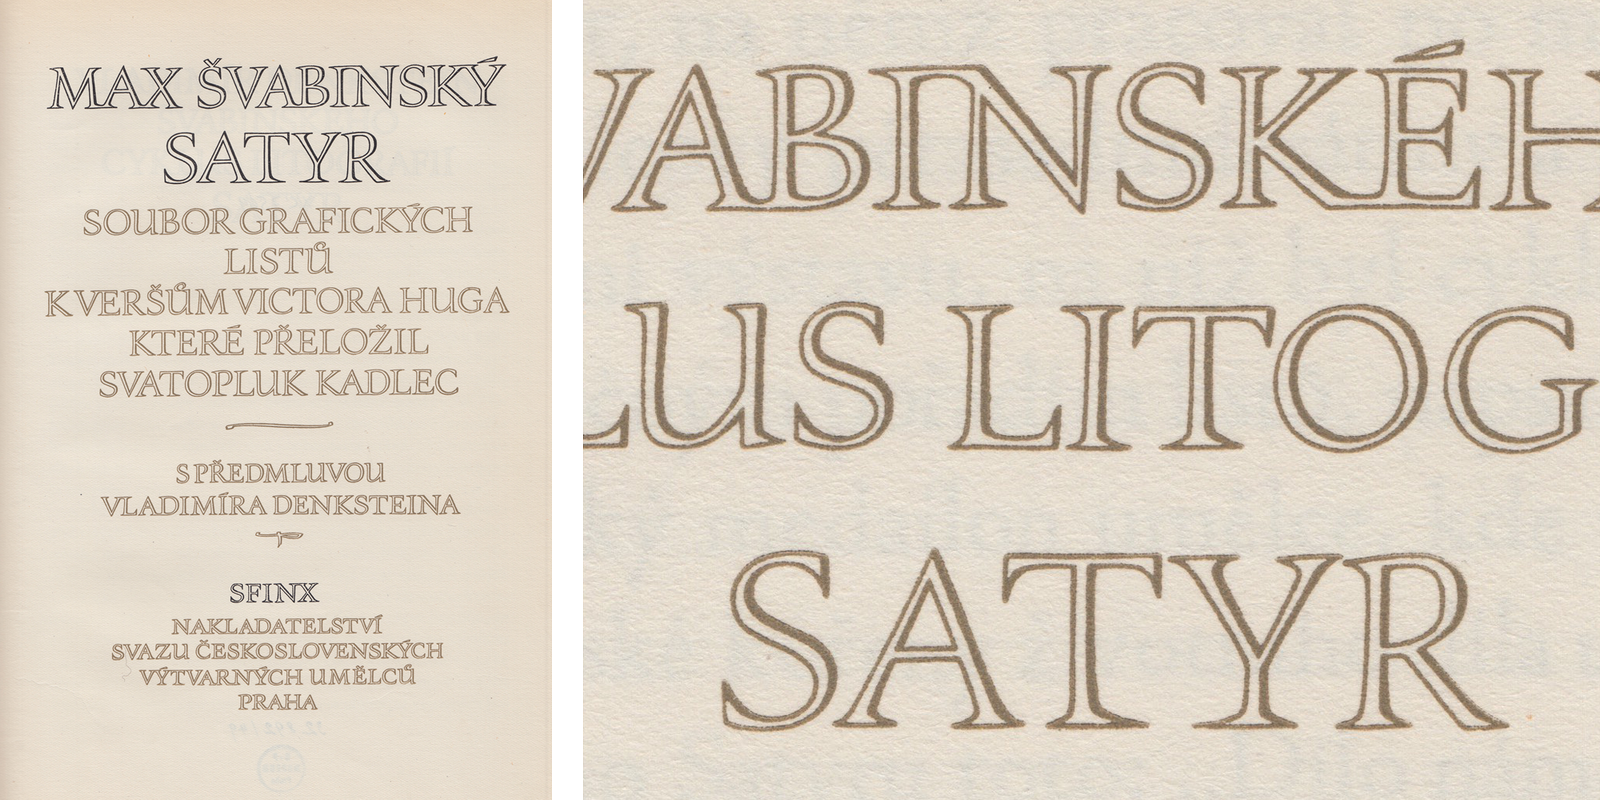 Title and divider pages of the Satyr publication including Menhart’s title inscription with unusual ligatures and his characteristic shadowing. Published by the Sfinx publishing house in Prague, 1949.